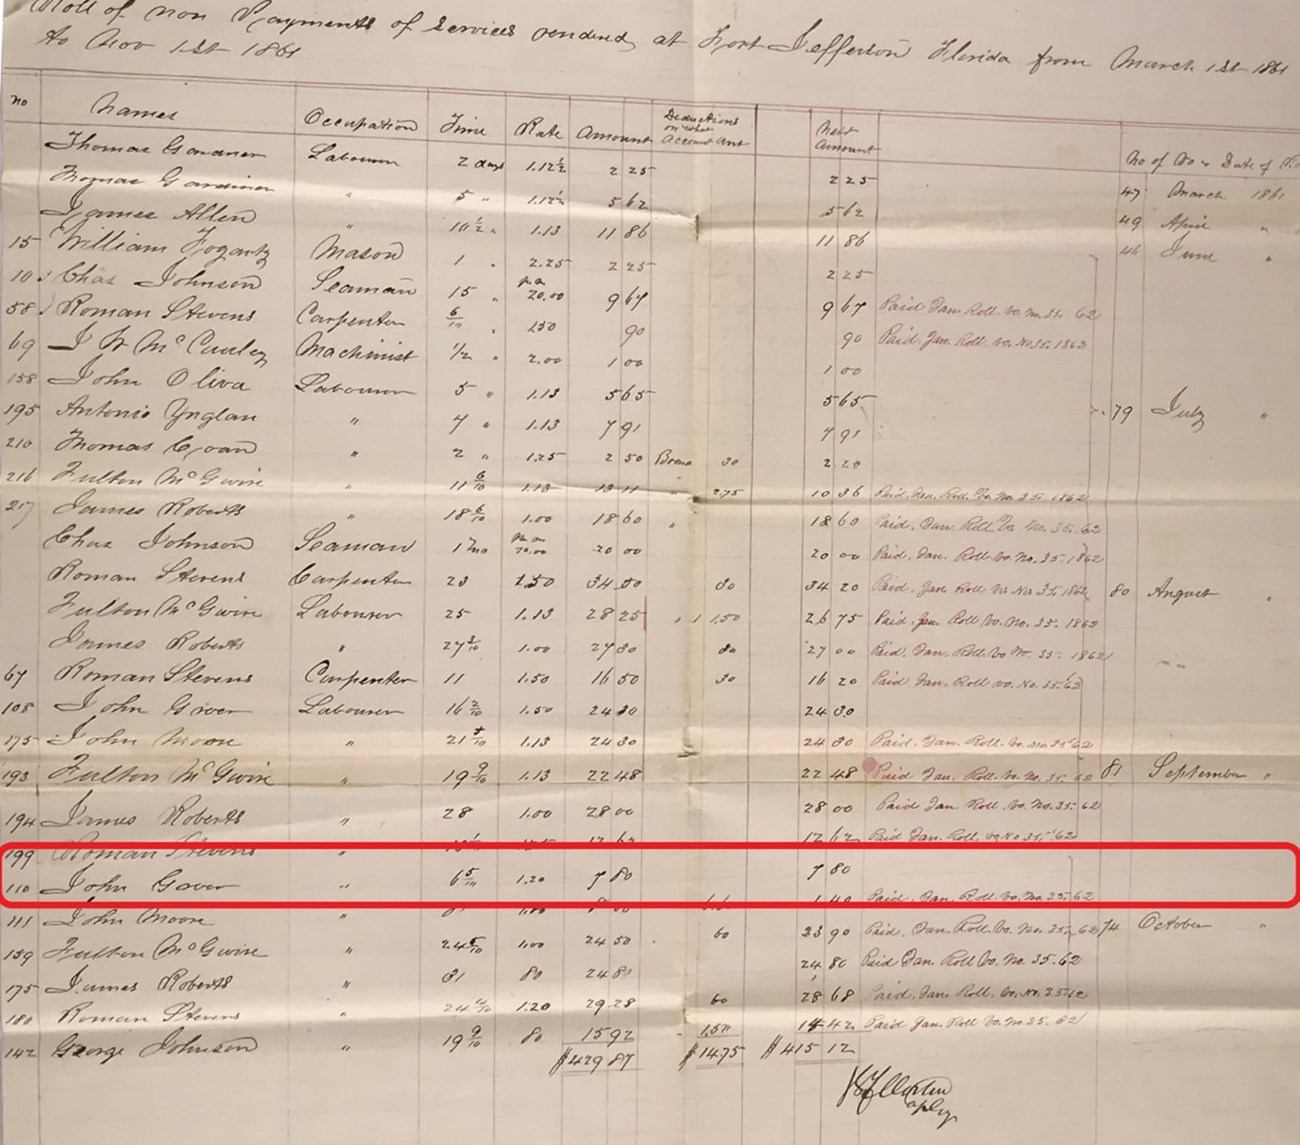 John Greer s name on roll of workers at Fort Jefferson 1